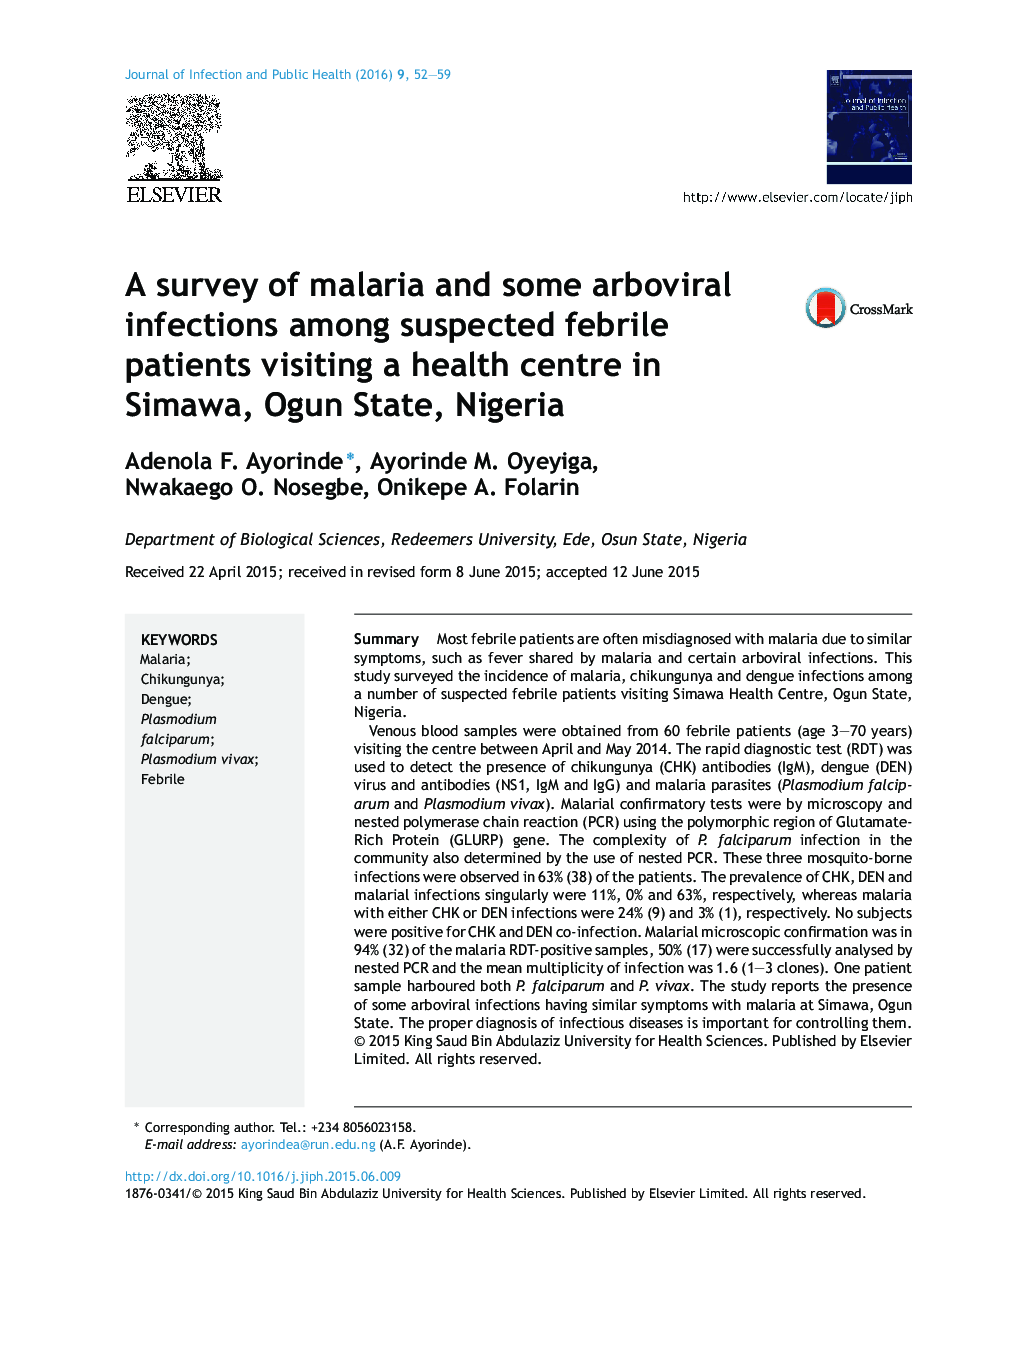 A survey of malaria and some arboviral infections among suspected febrile patients visiting a health centre in Simawa, Ogun State, Nigeria